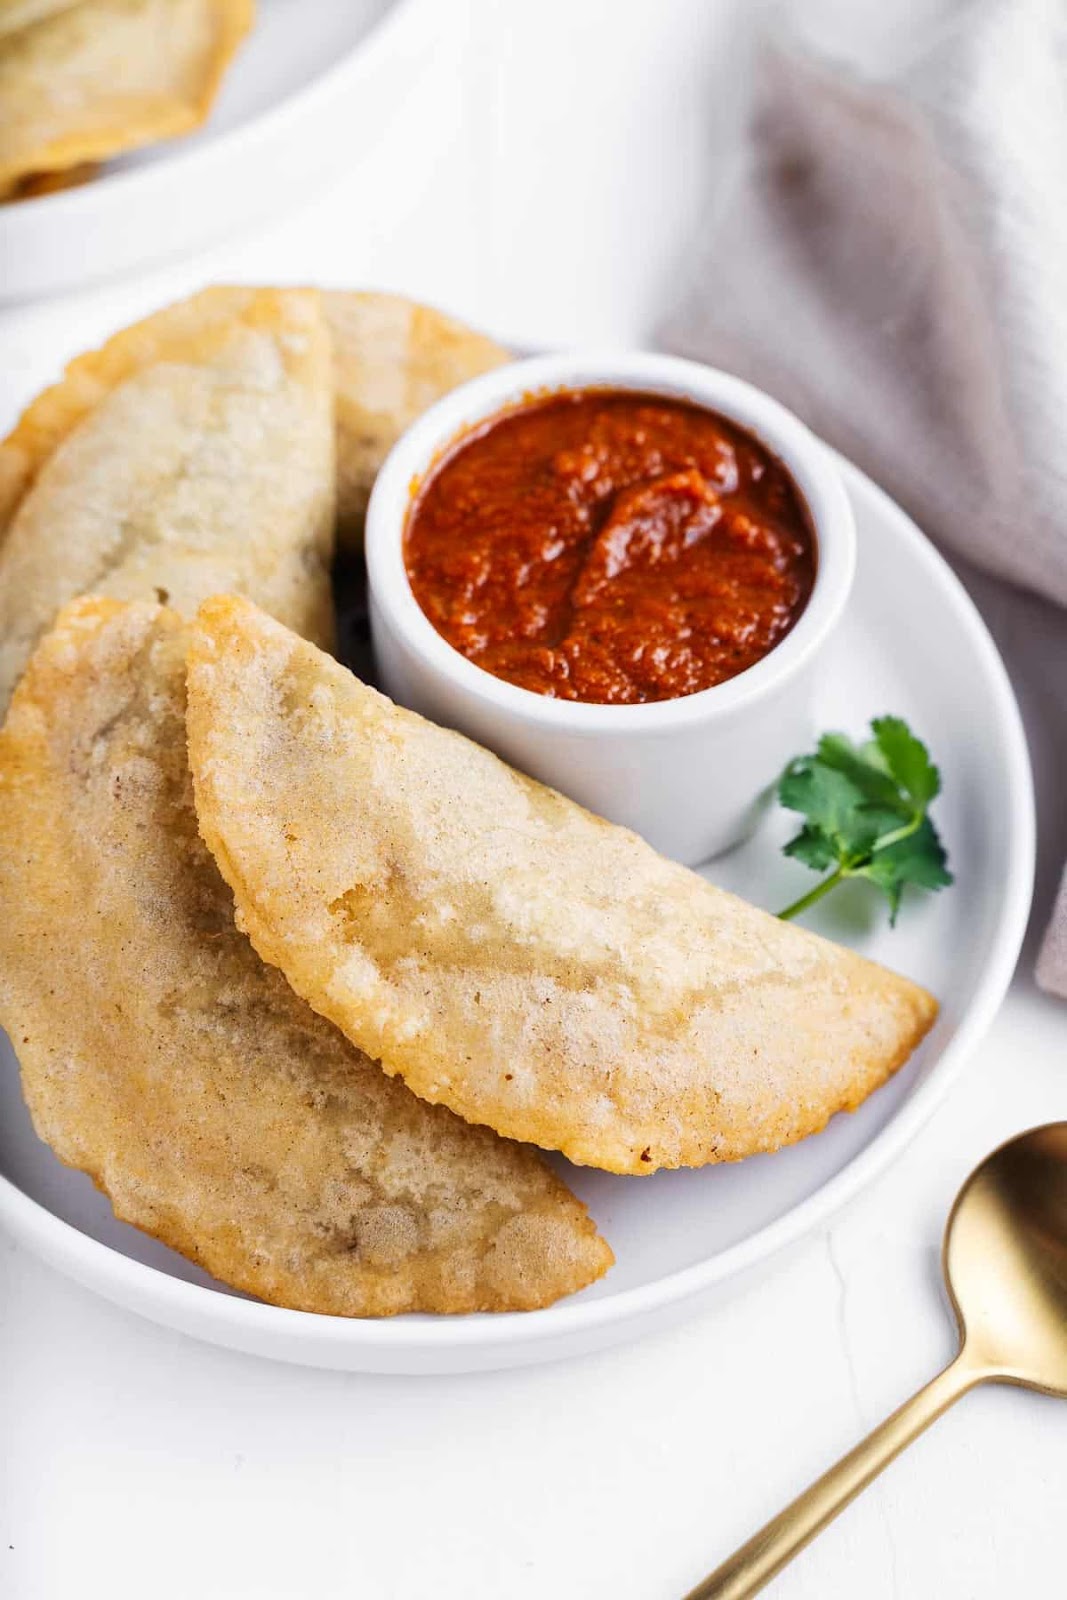 A plate of fried empanadas with dipping sauce.